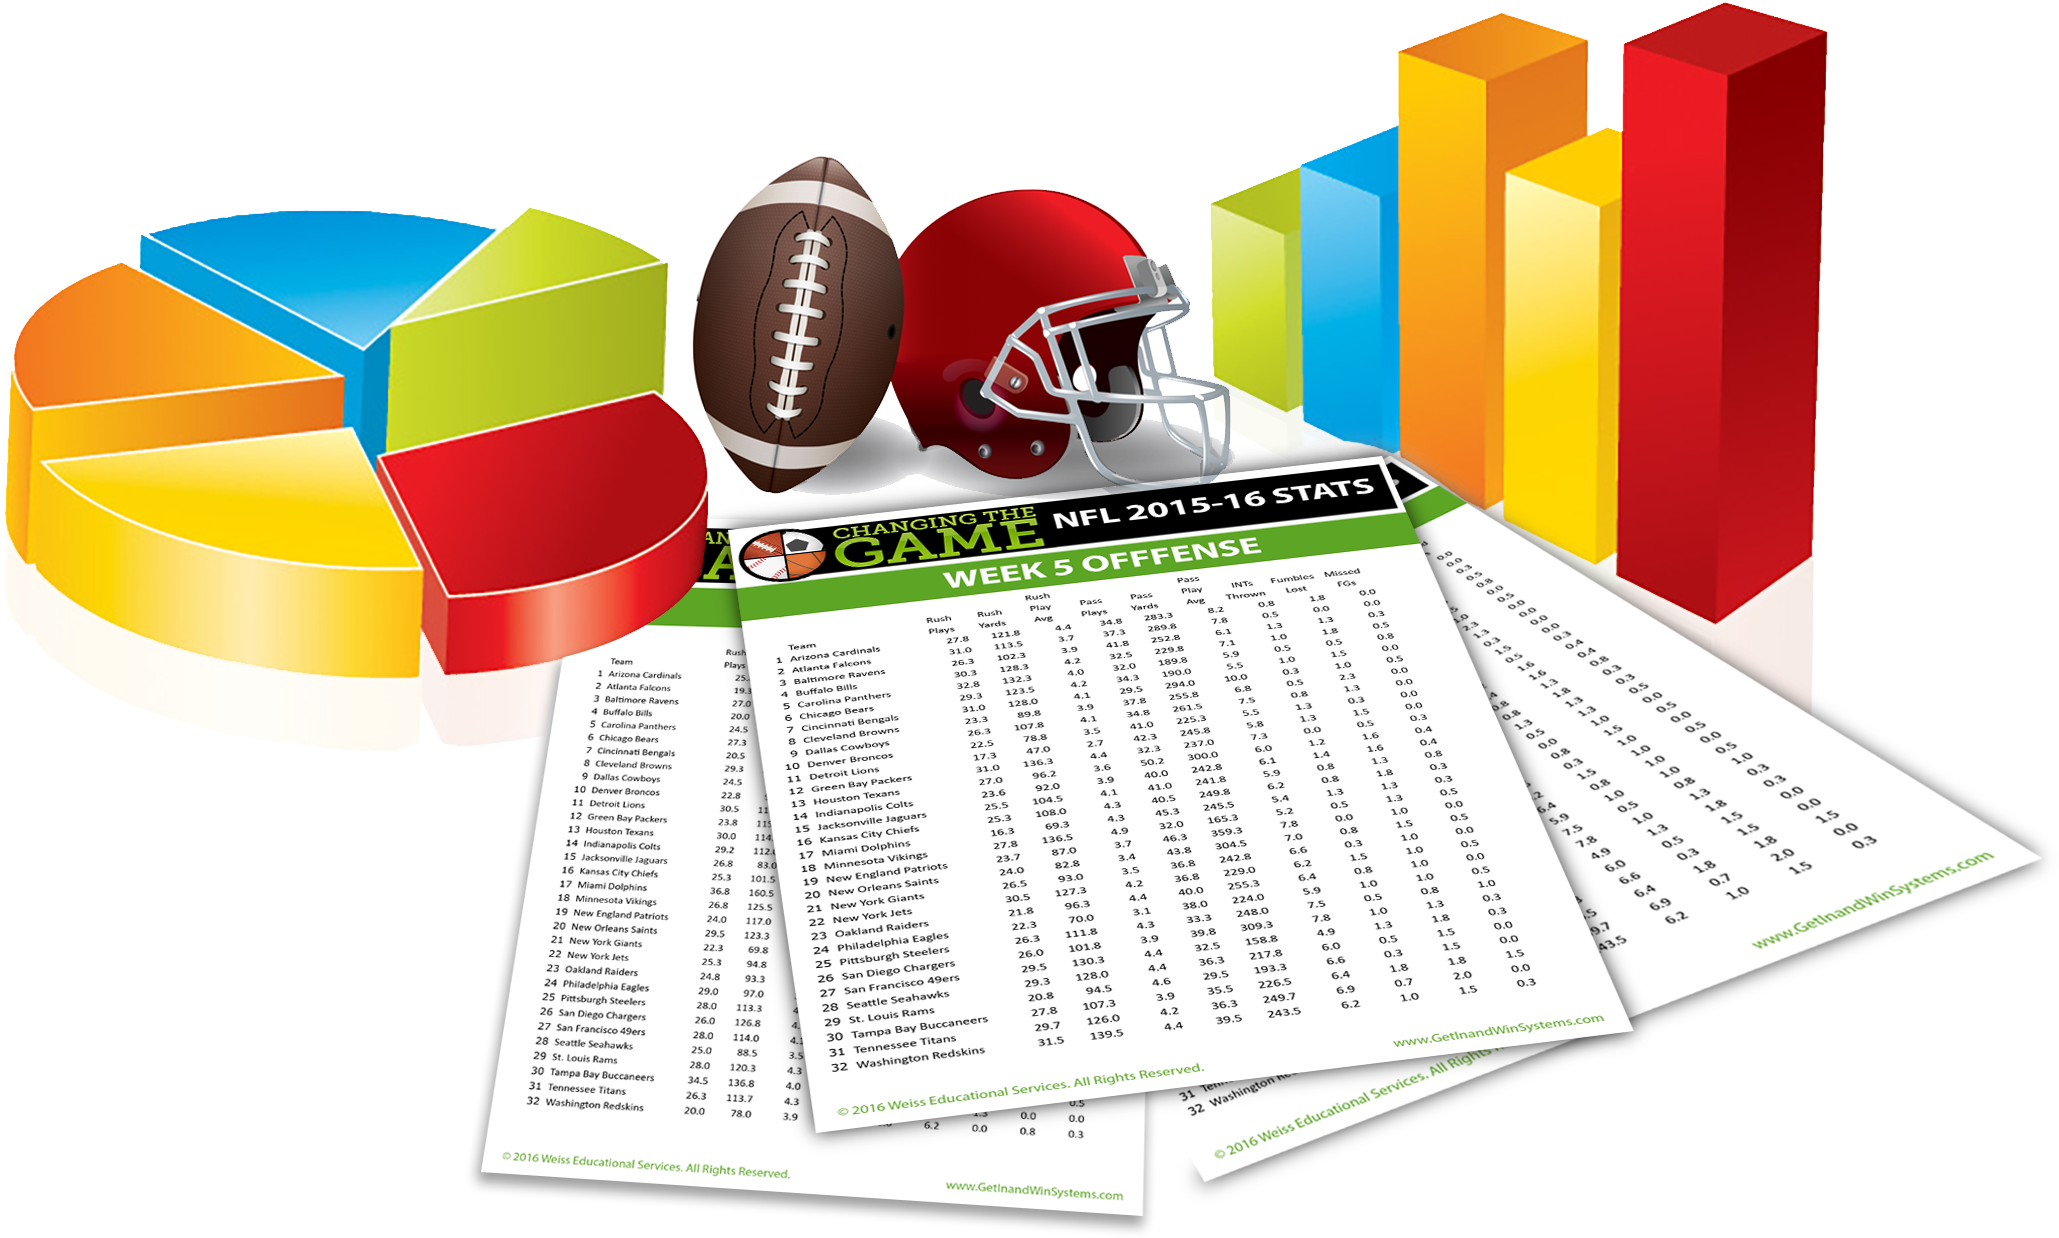 Sport System Stats - Business Intelligence With Knowledge Management (2154x1335)